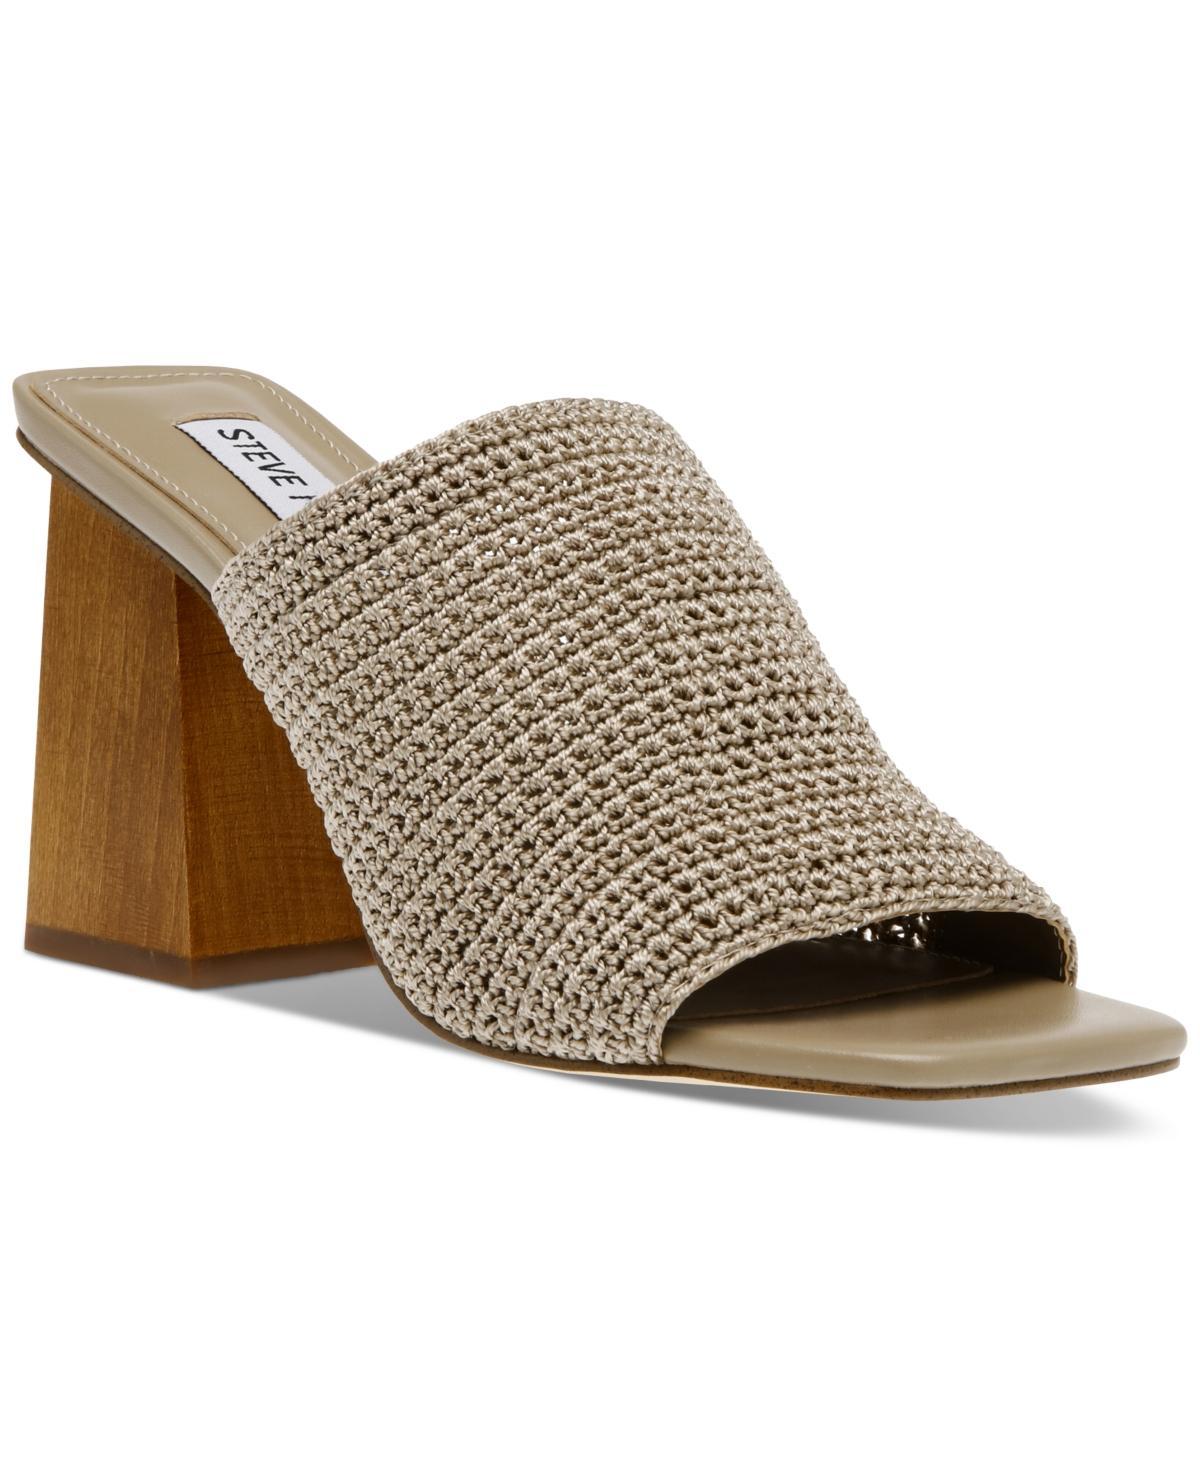 Steve Madden Realize Women's Sandals Product Image